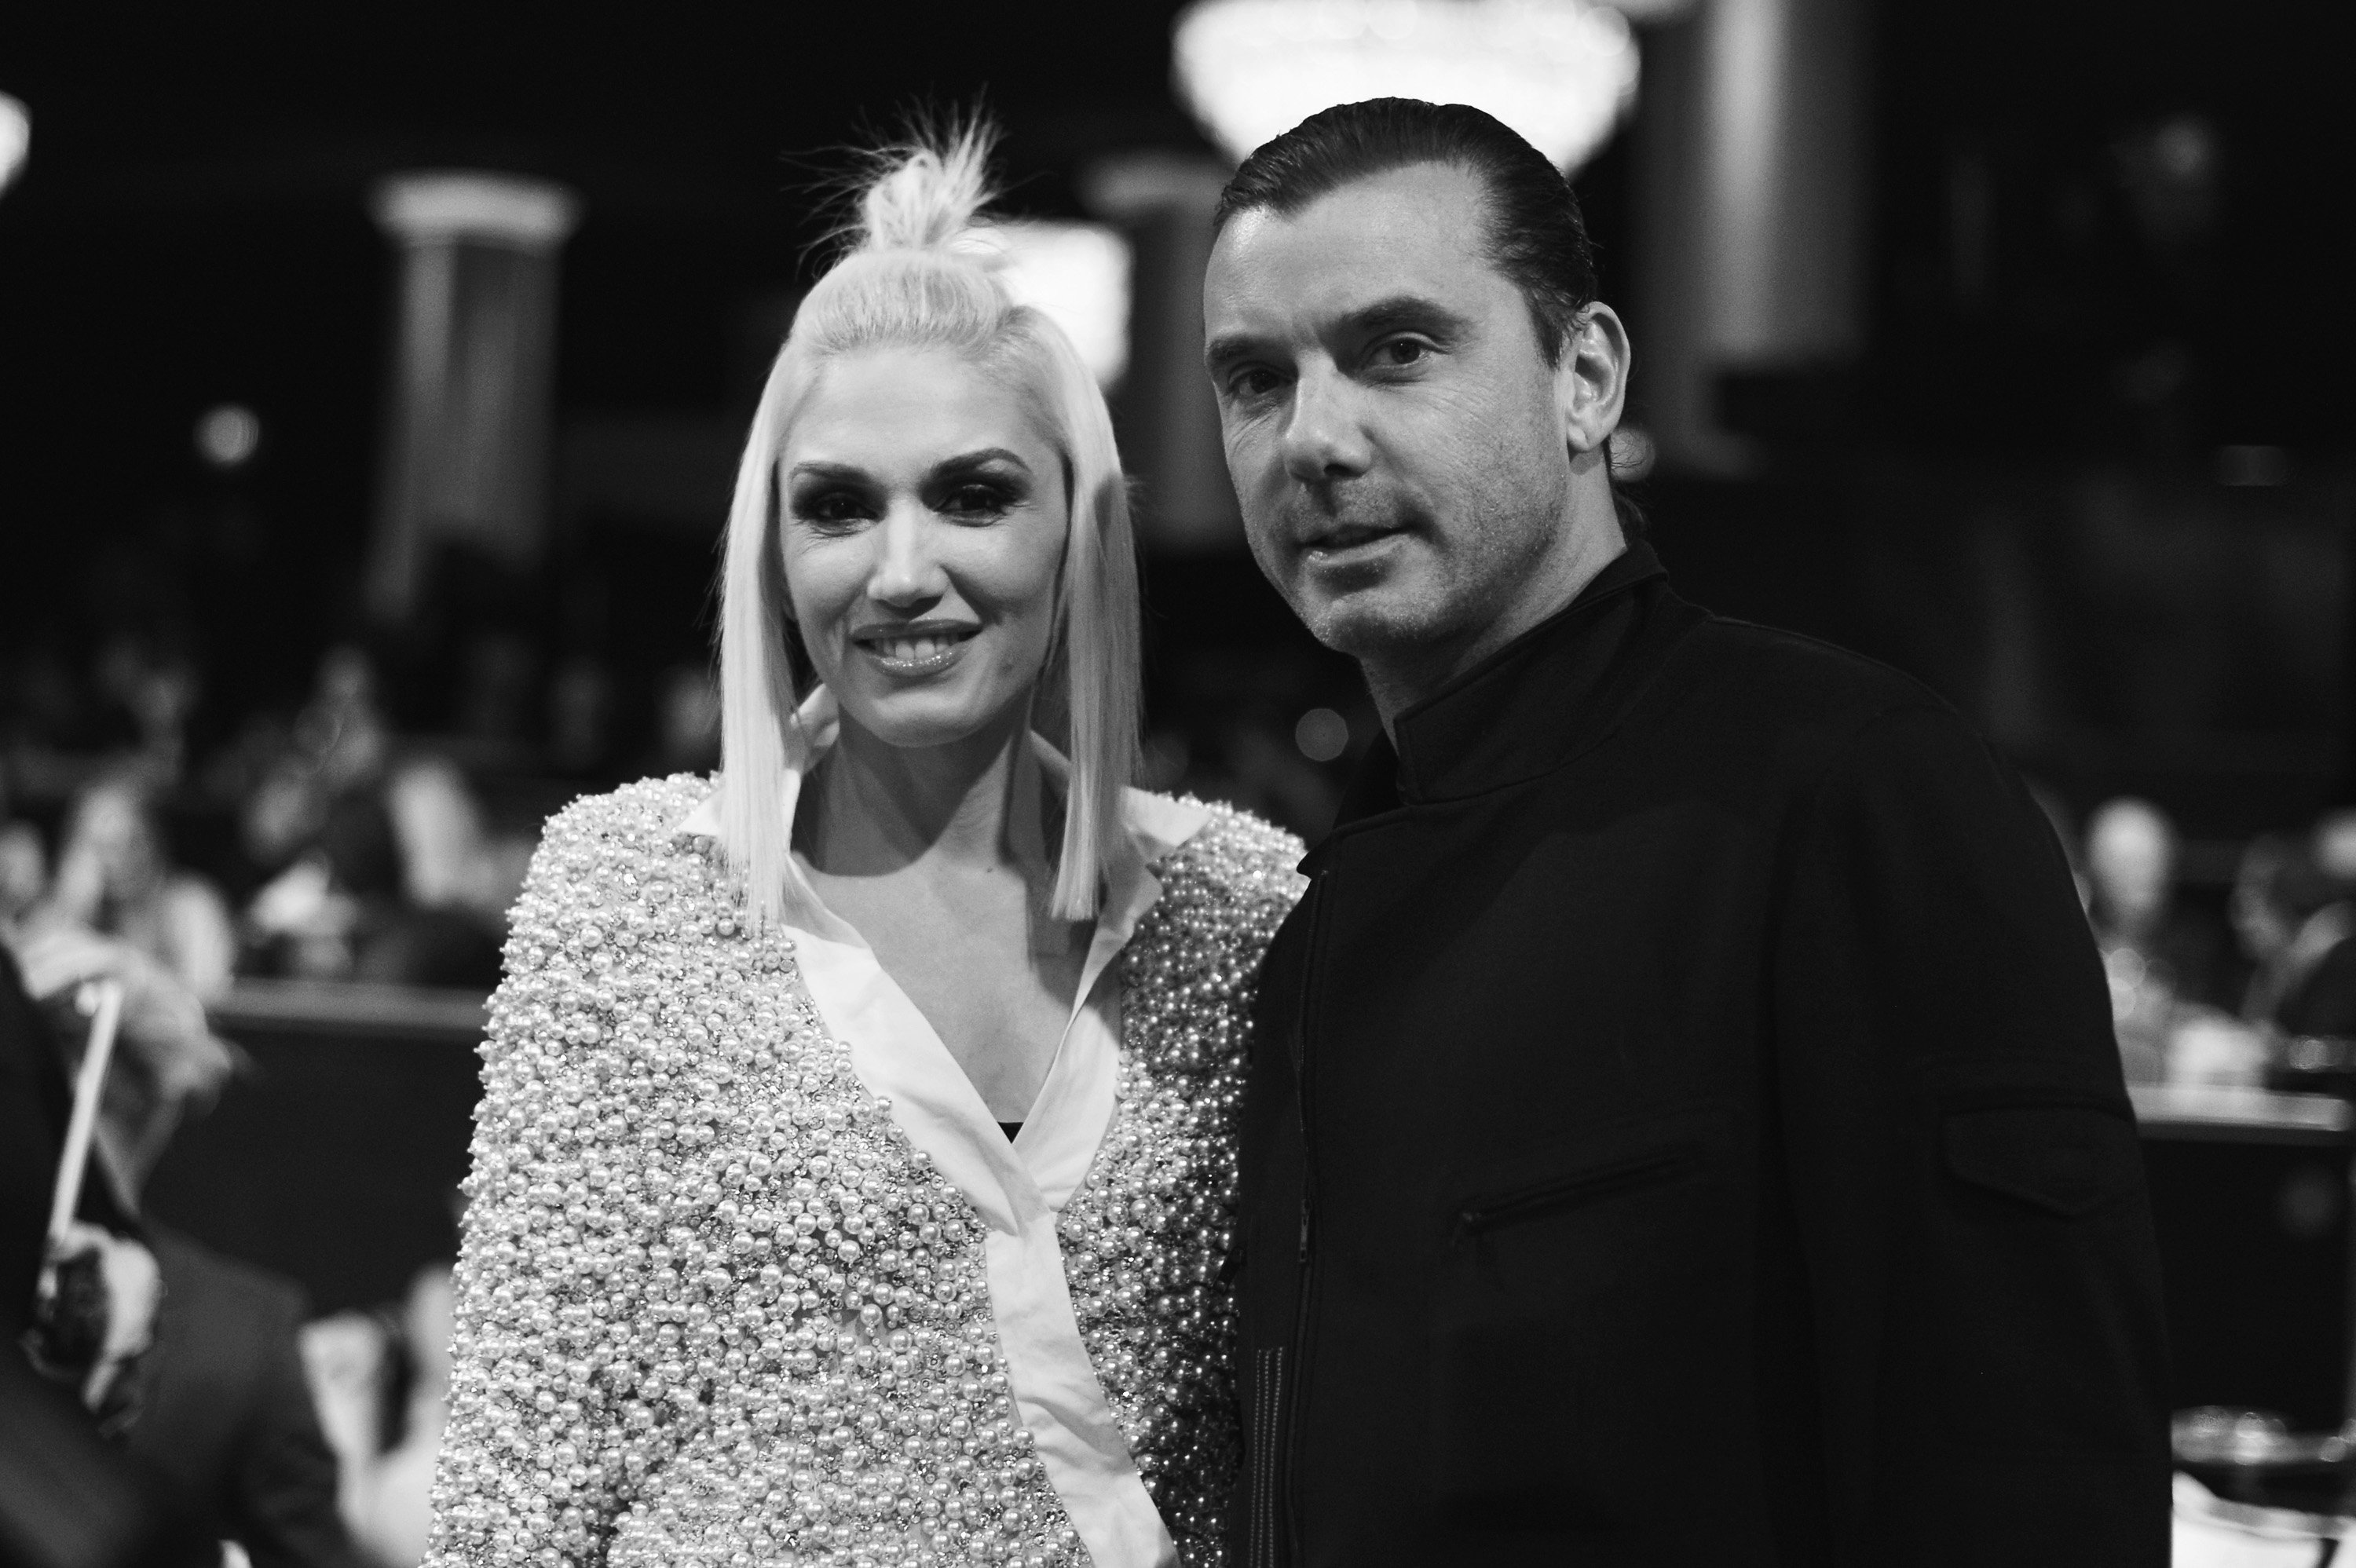  Gwen Stefani and Gavin Rossdale at the PEOPLE Magazine Awards at The Beverly Hilton Hotel on December 18, 2014. | Photo: Getty Images